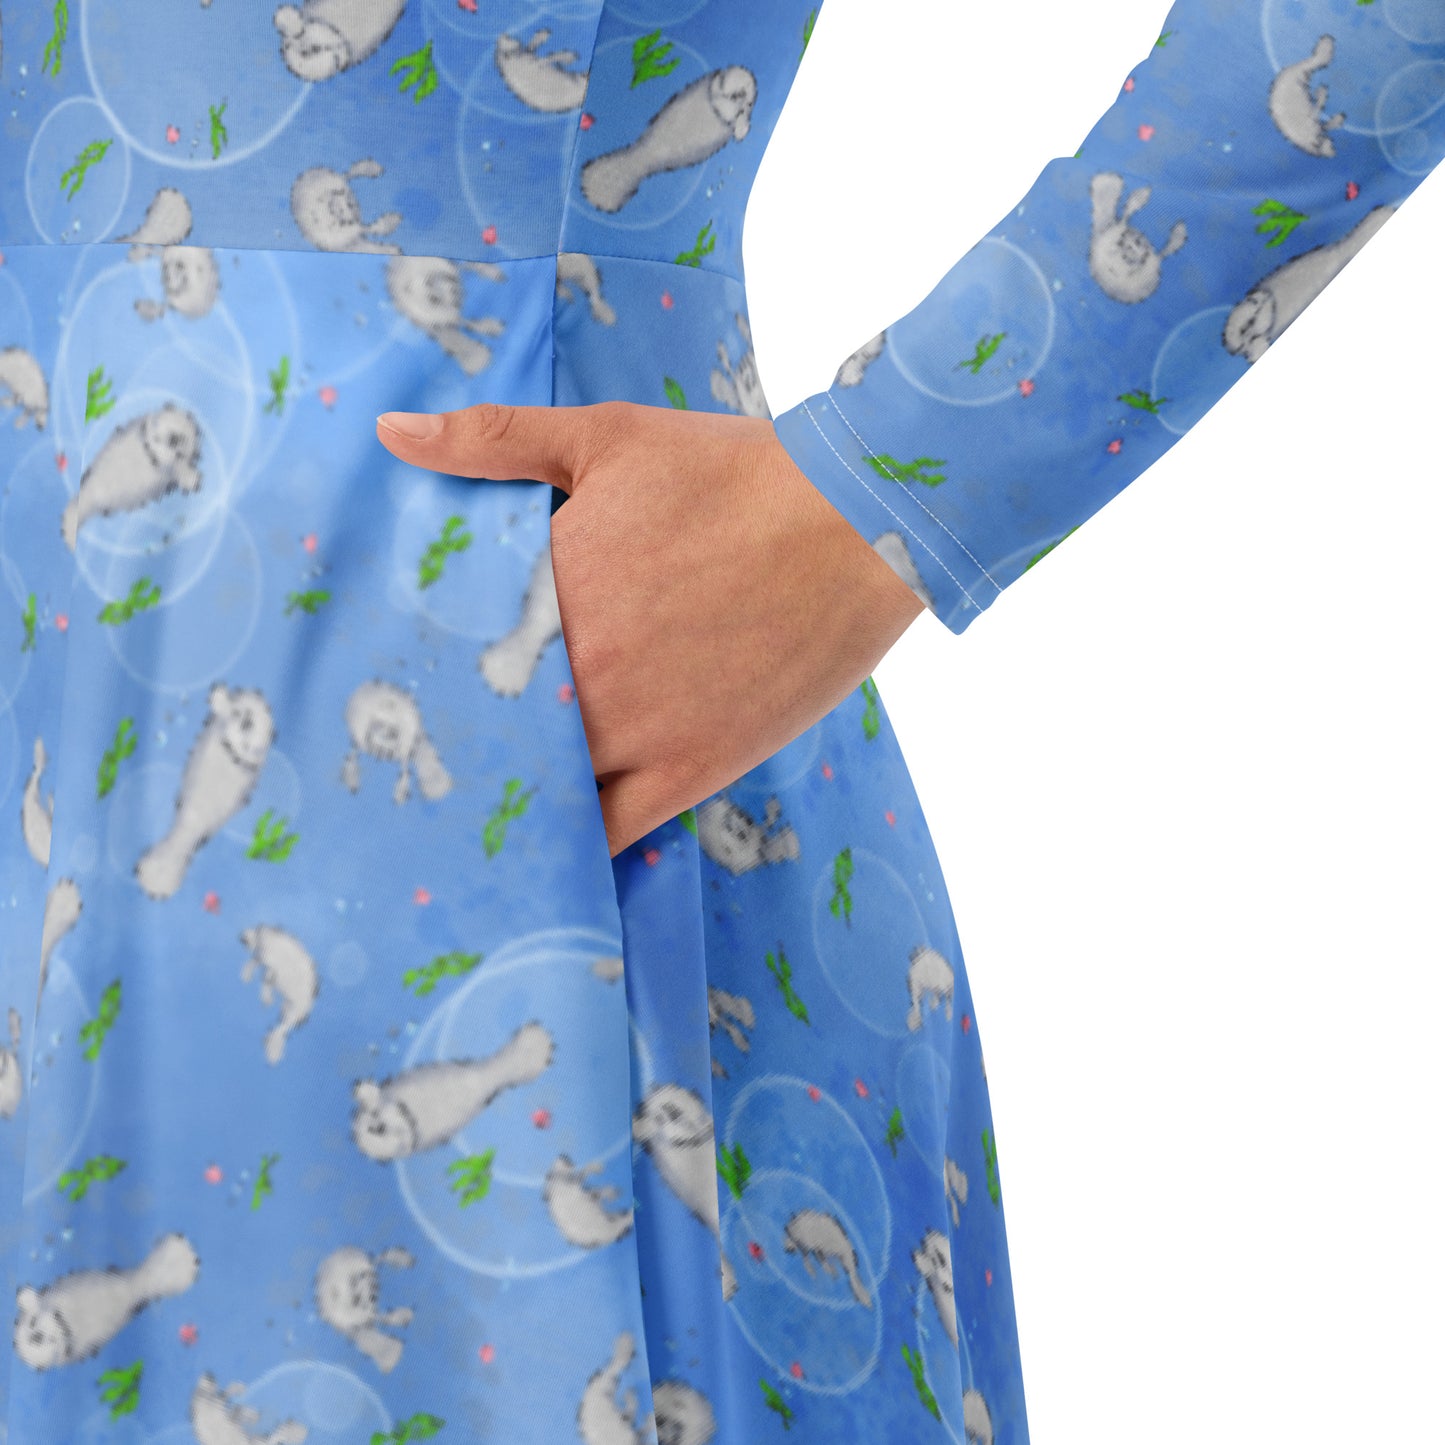 Long sleeve midi dress with fitted waist, flared bottom, and side pockets. Features a patterned design of manatees, seashells, seaweed, and bubbles on an ocean blue background. Detail image shows model's hand in pocket.